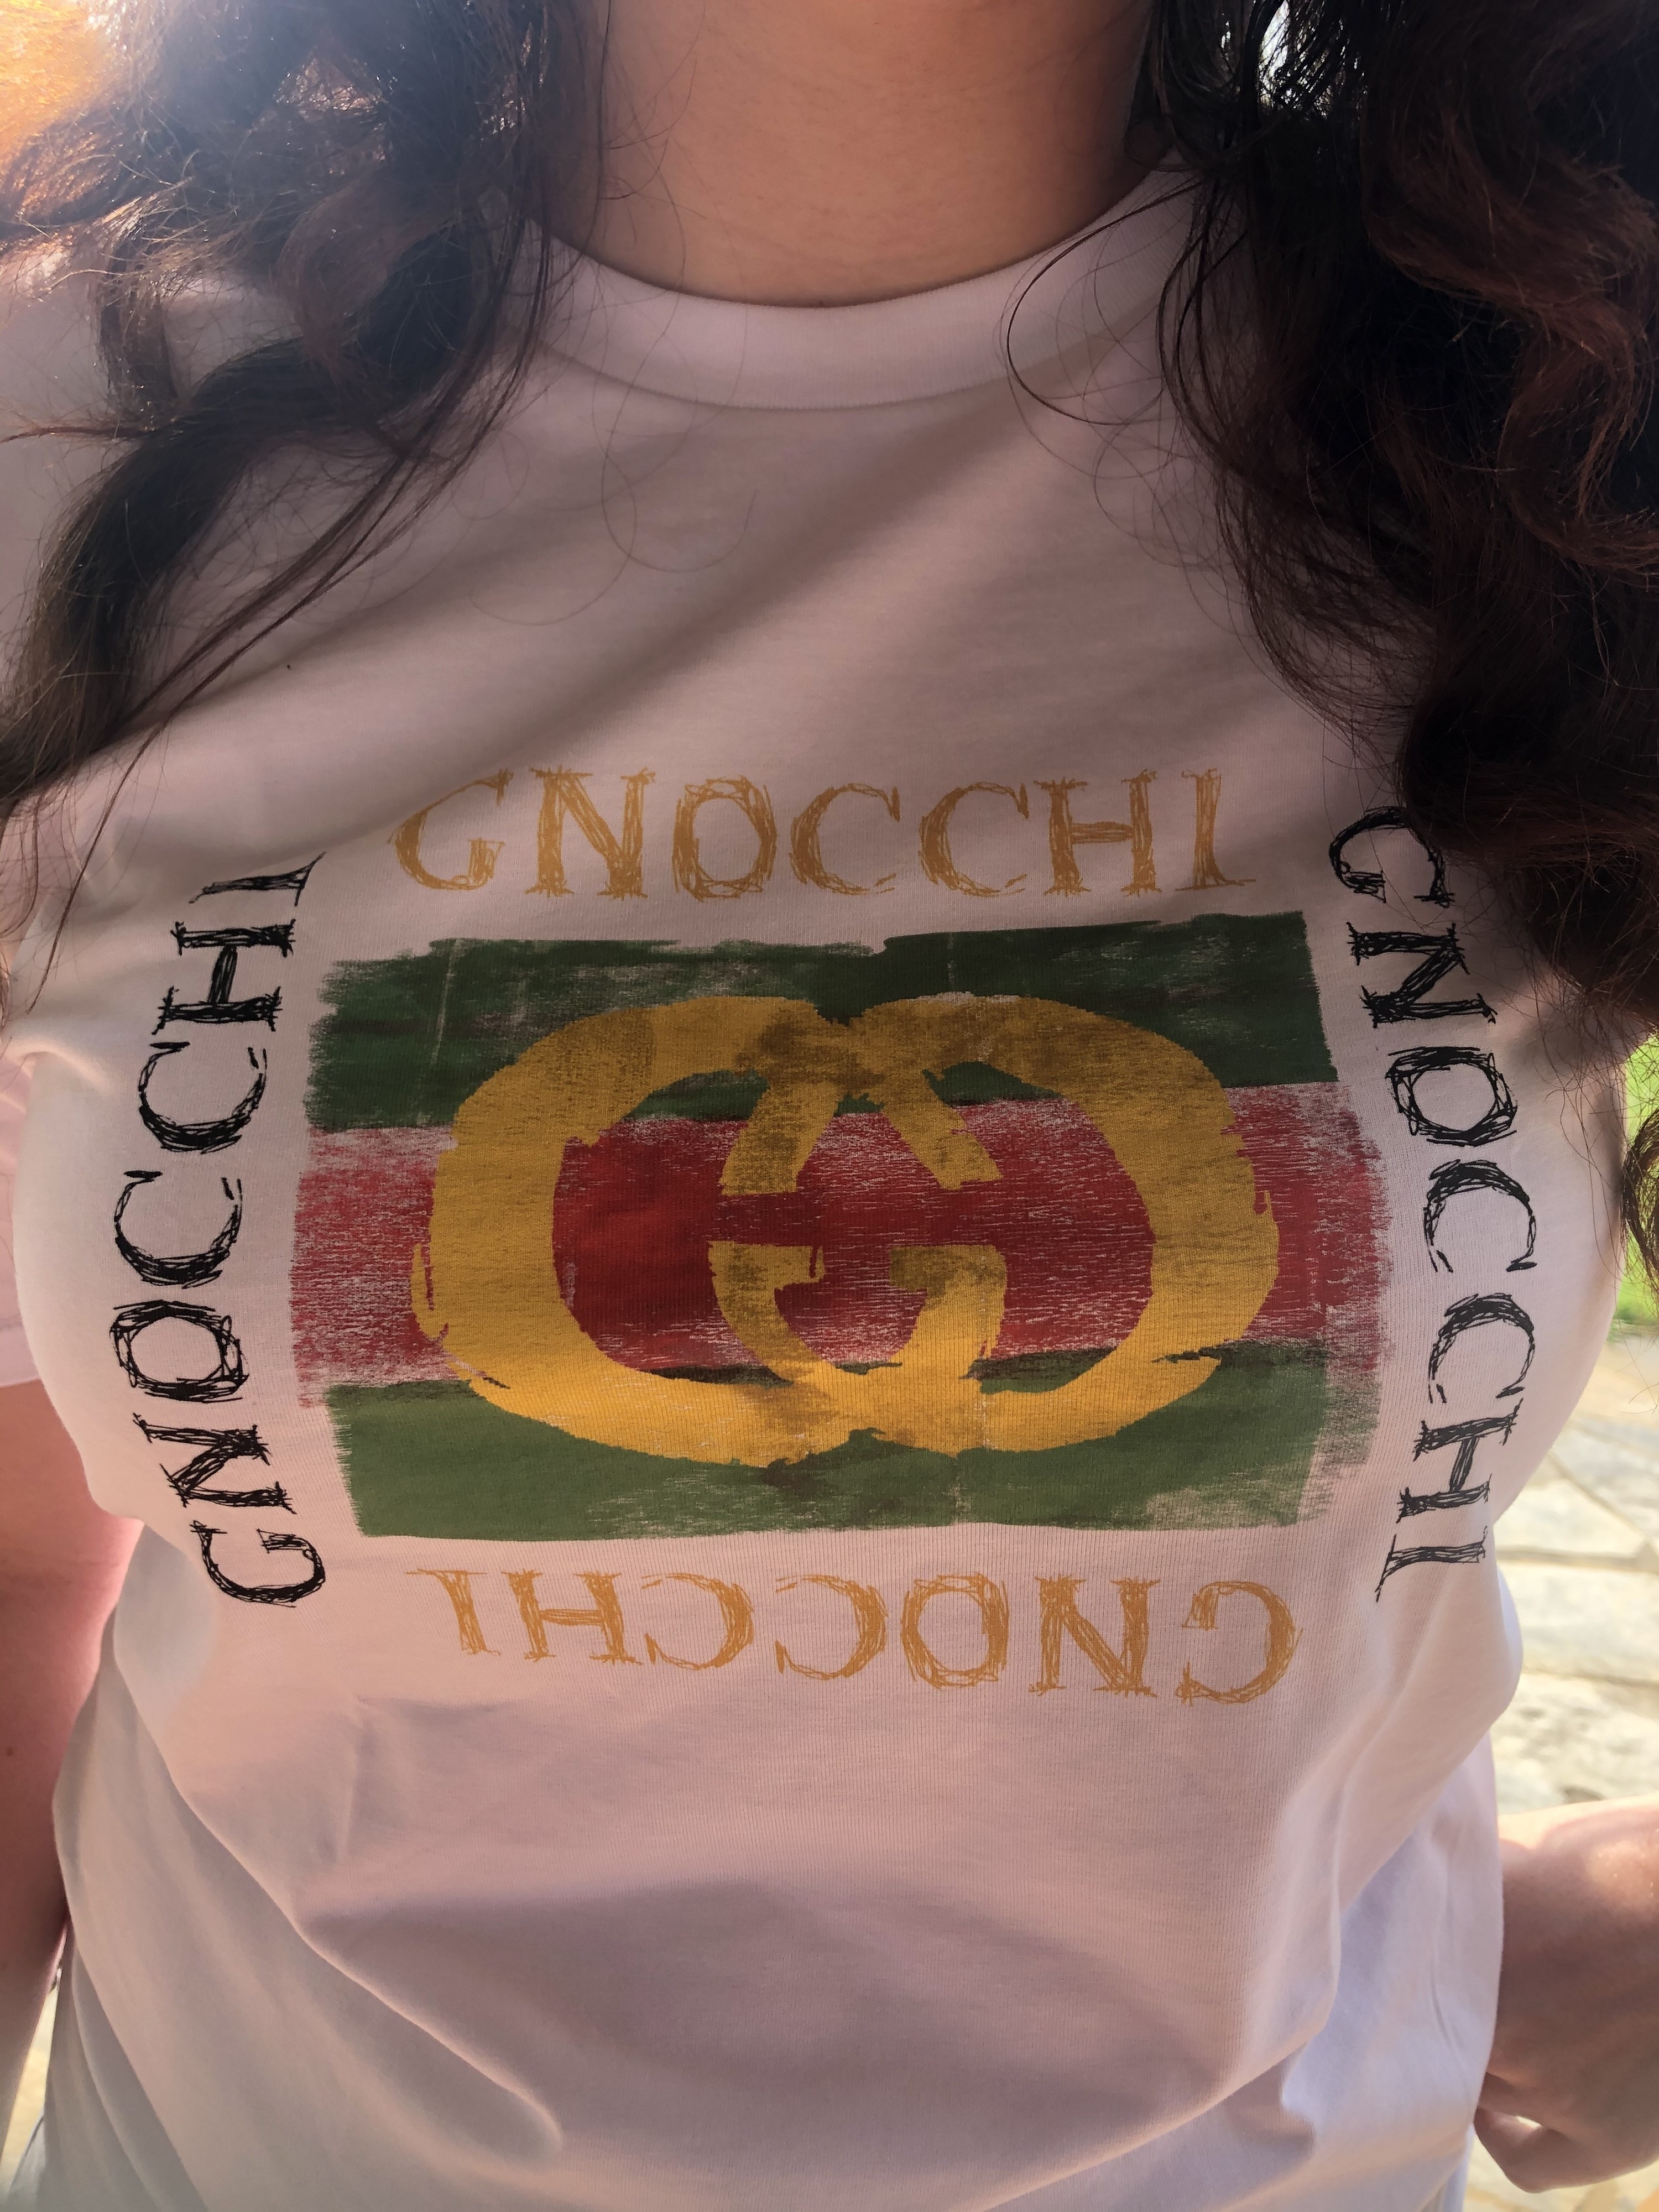 closeup of the print on the shirt of the writer wearing it. The print look like the double G Gucci logo except with the word &quot;Gnocchi&quot; instead of &quot;Gucci&quot;